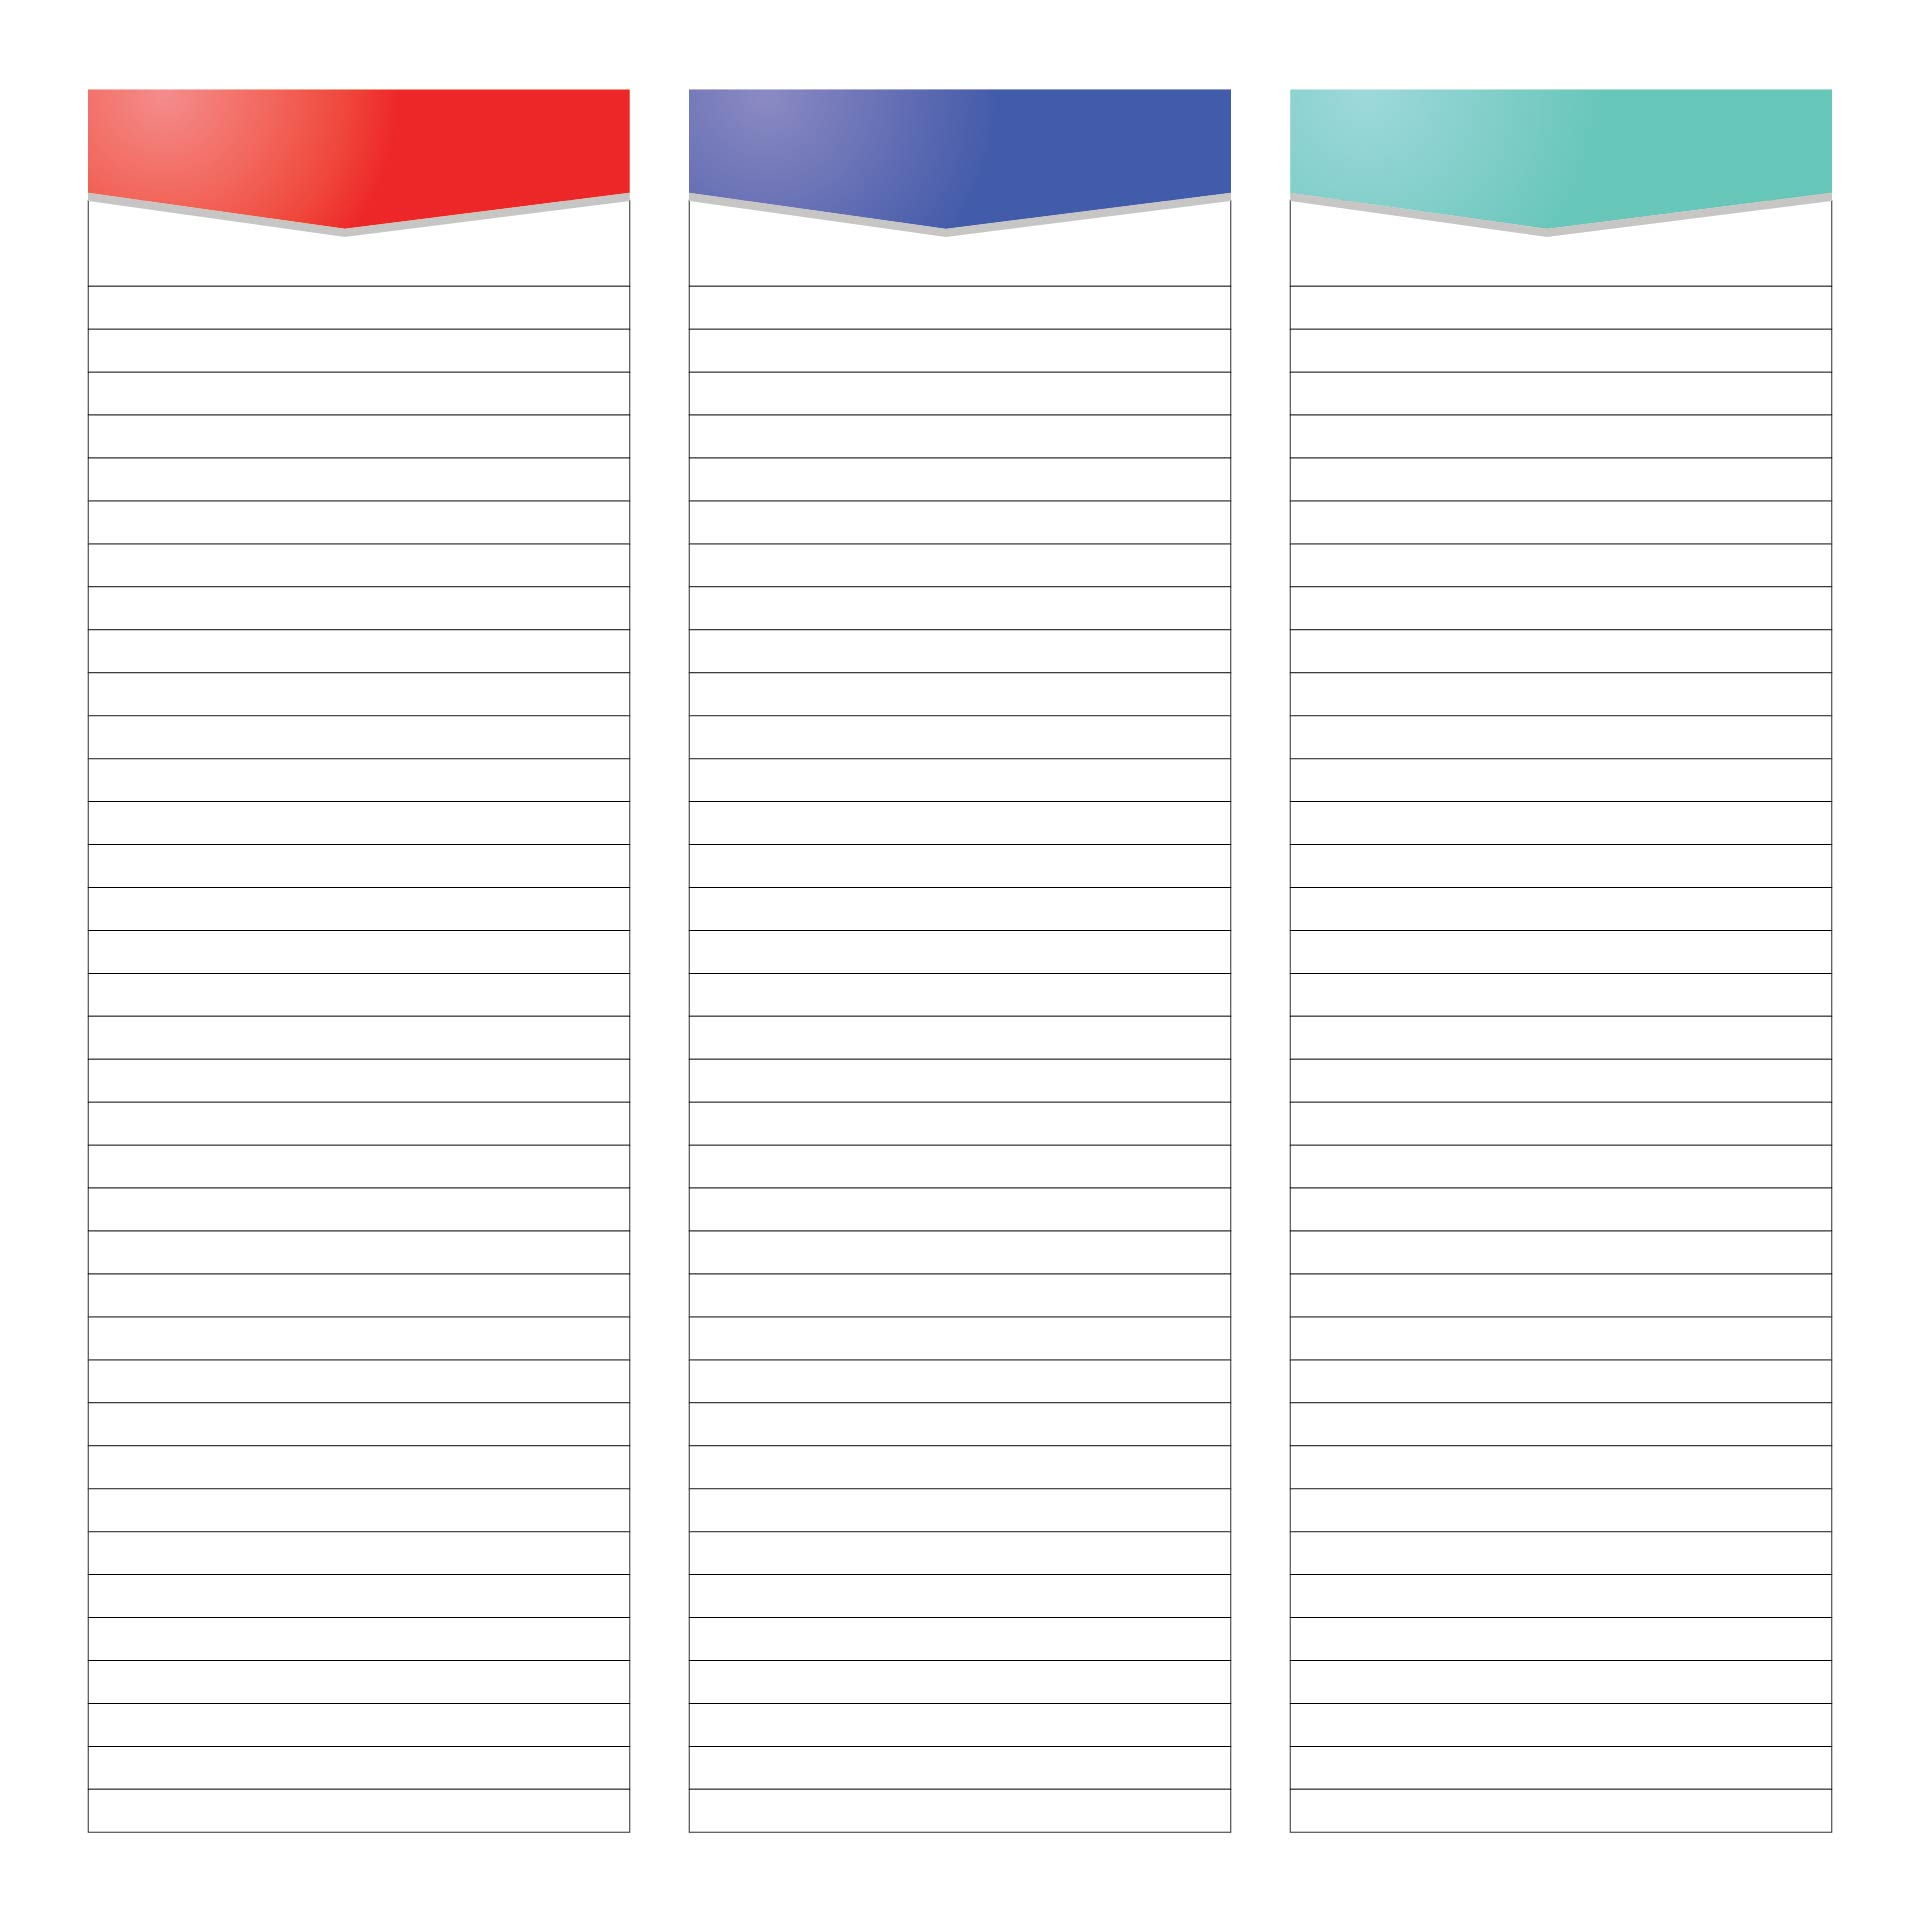 7-best-images-of-printable-lined-column-paper-template-printable-column-paper-template